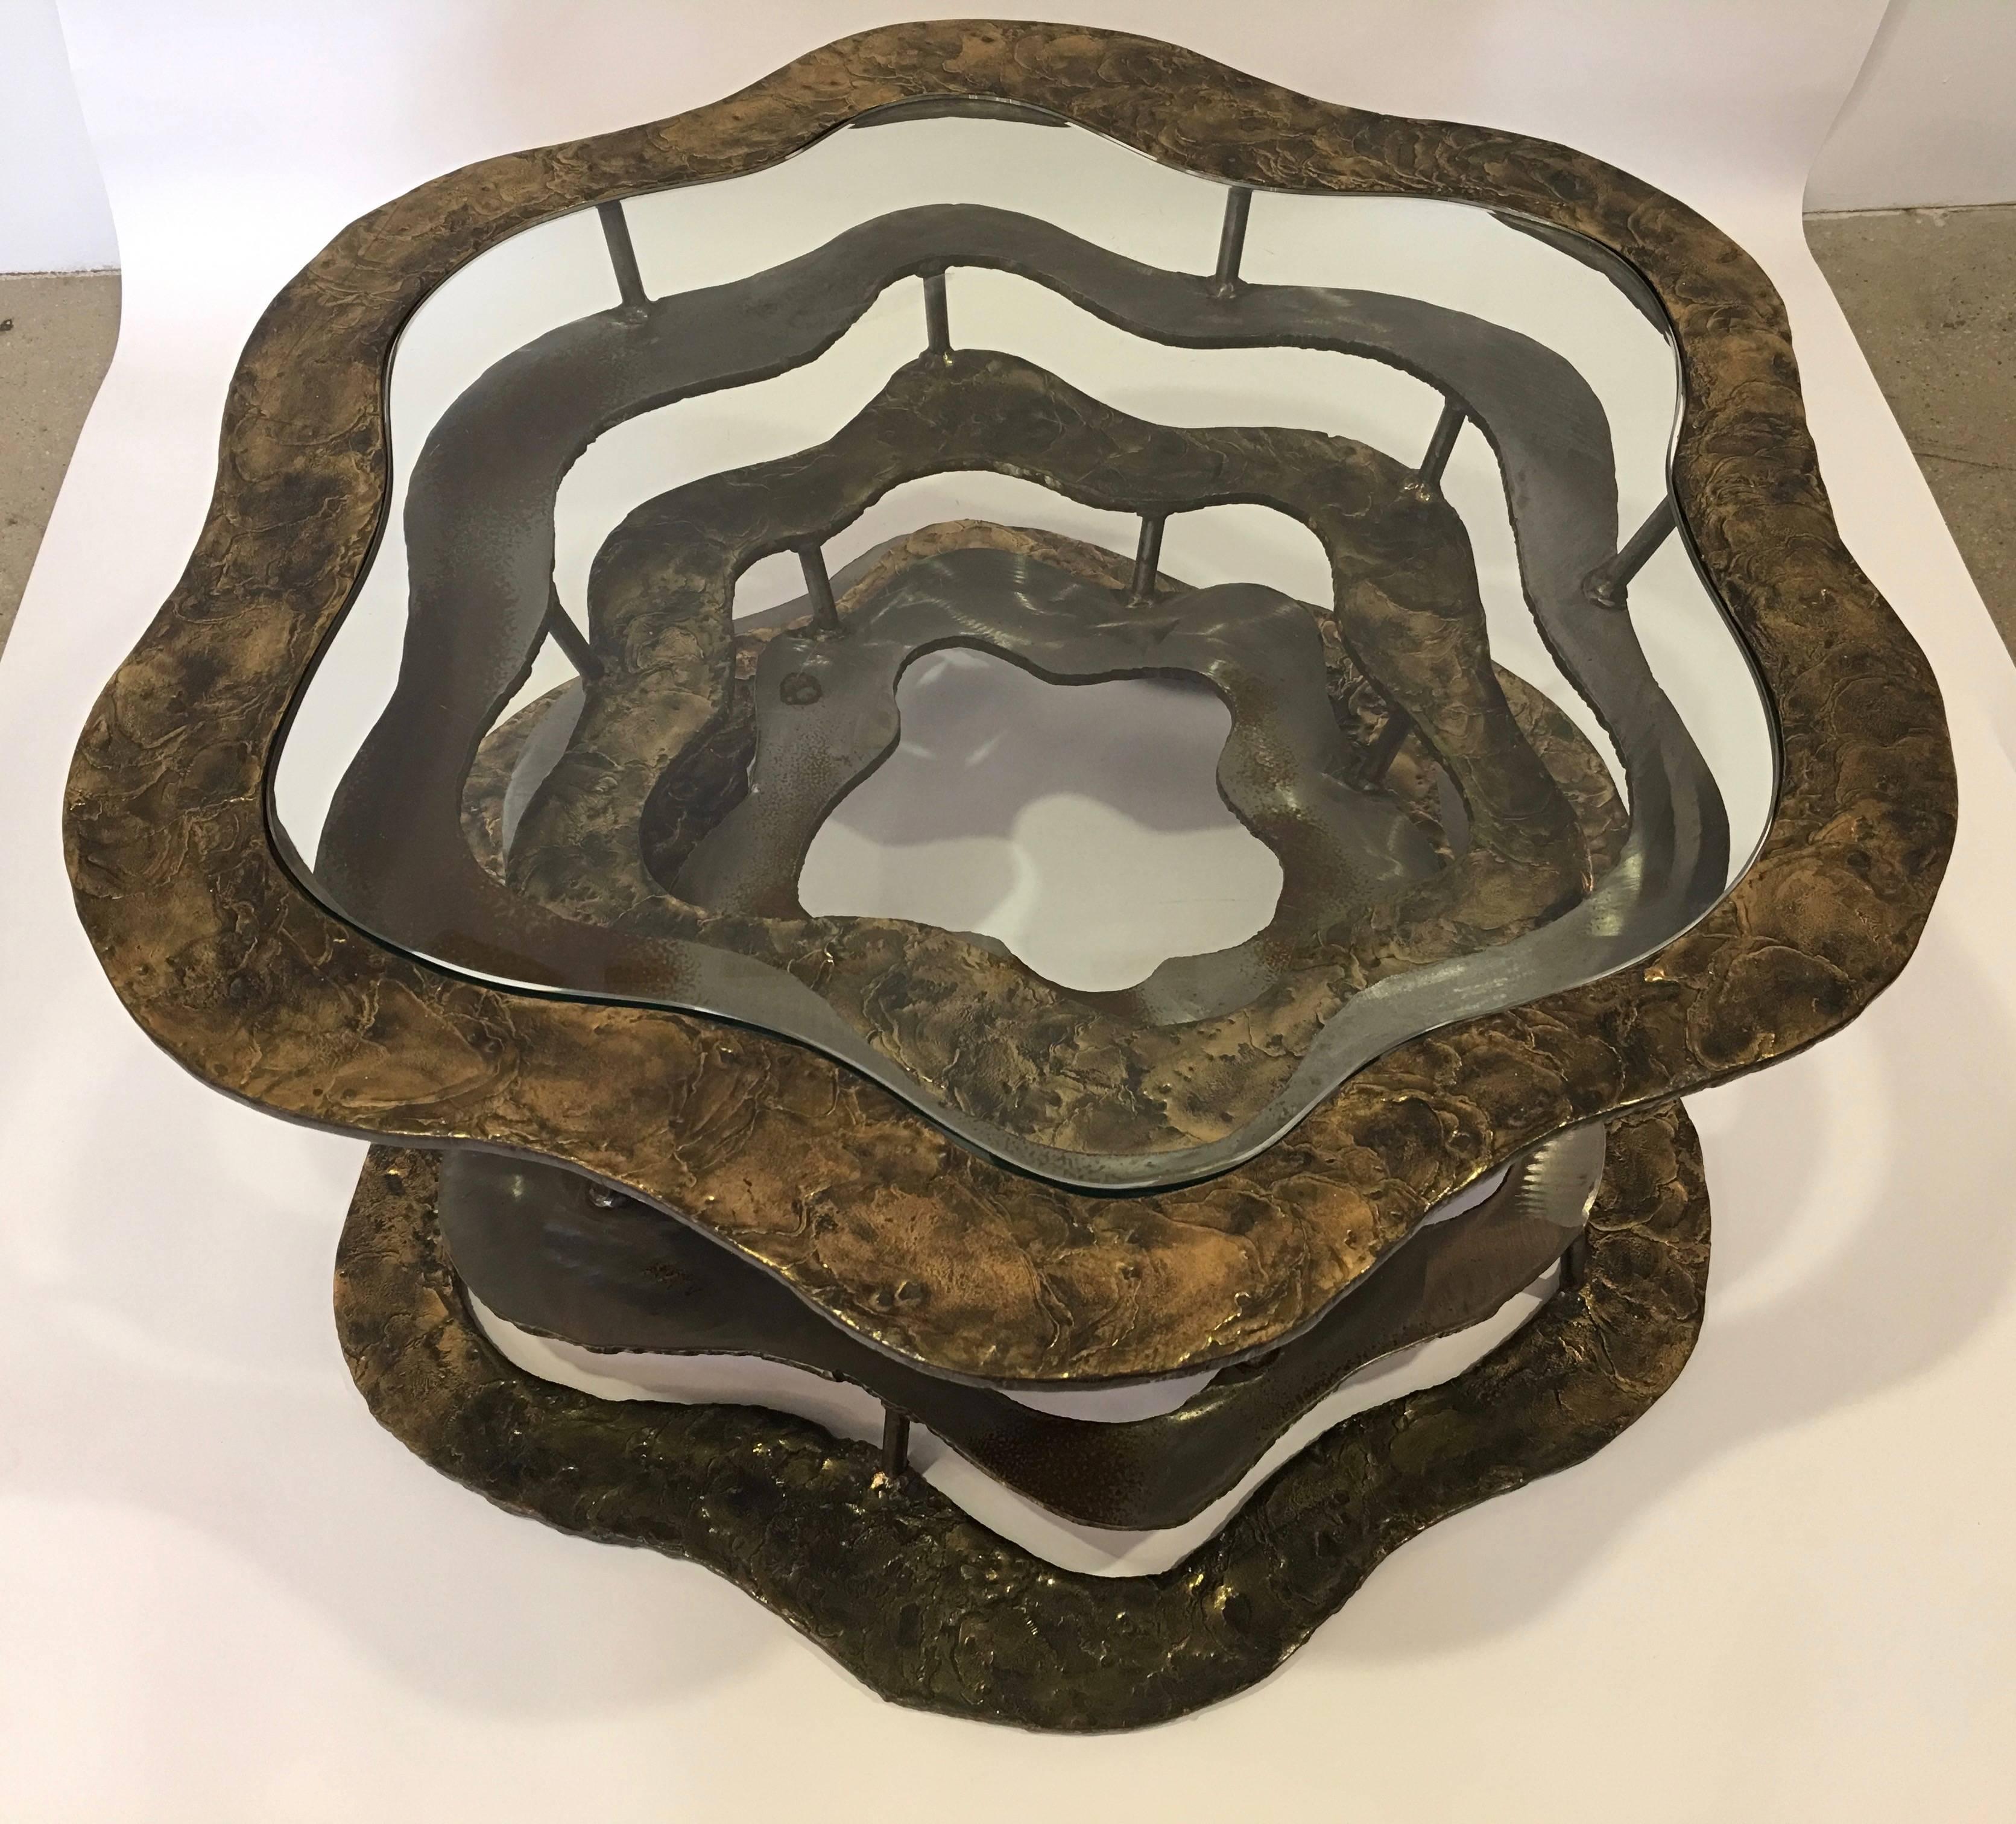 Contemporary New York sculptor Silas Seandel's Volcano coffee table with glass top was made in 1977. The table consists of 7 alternating textured bronze and matte finished stainless steel amorphic rings. Each ring above the base has a series of